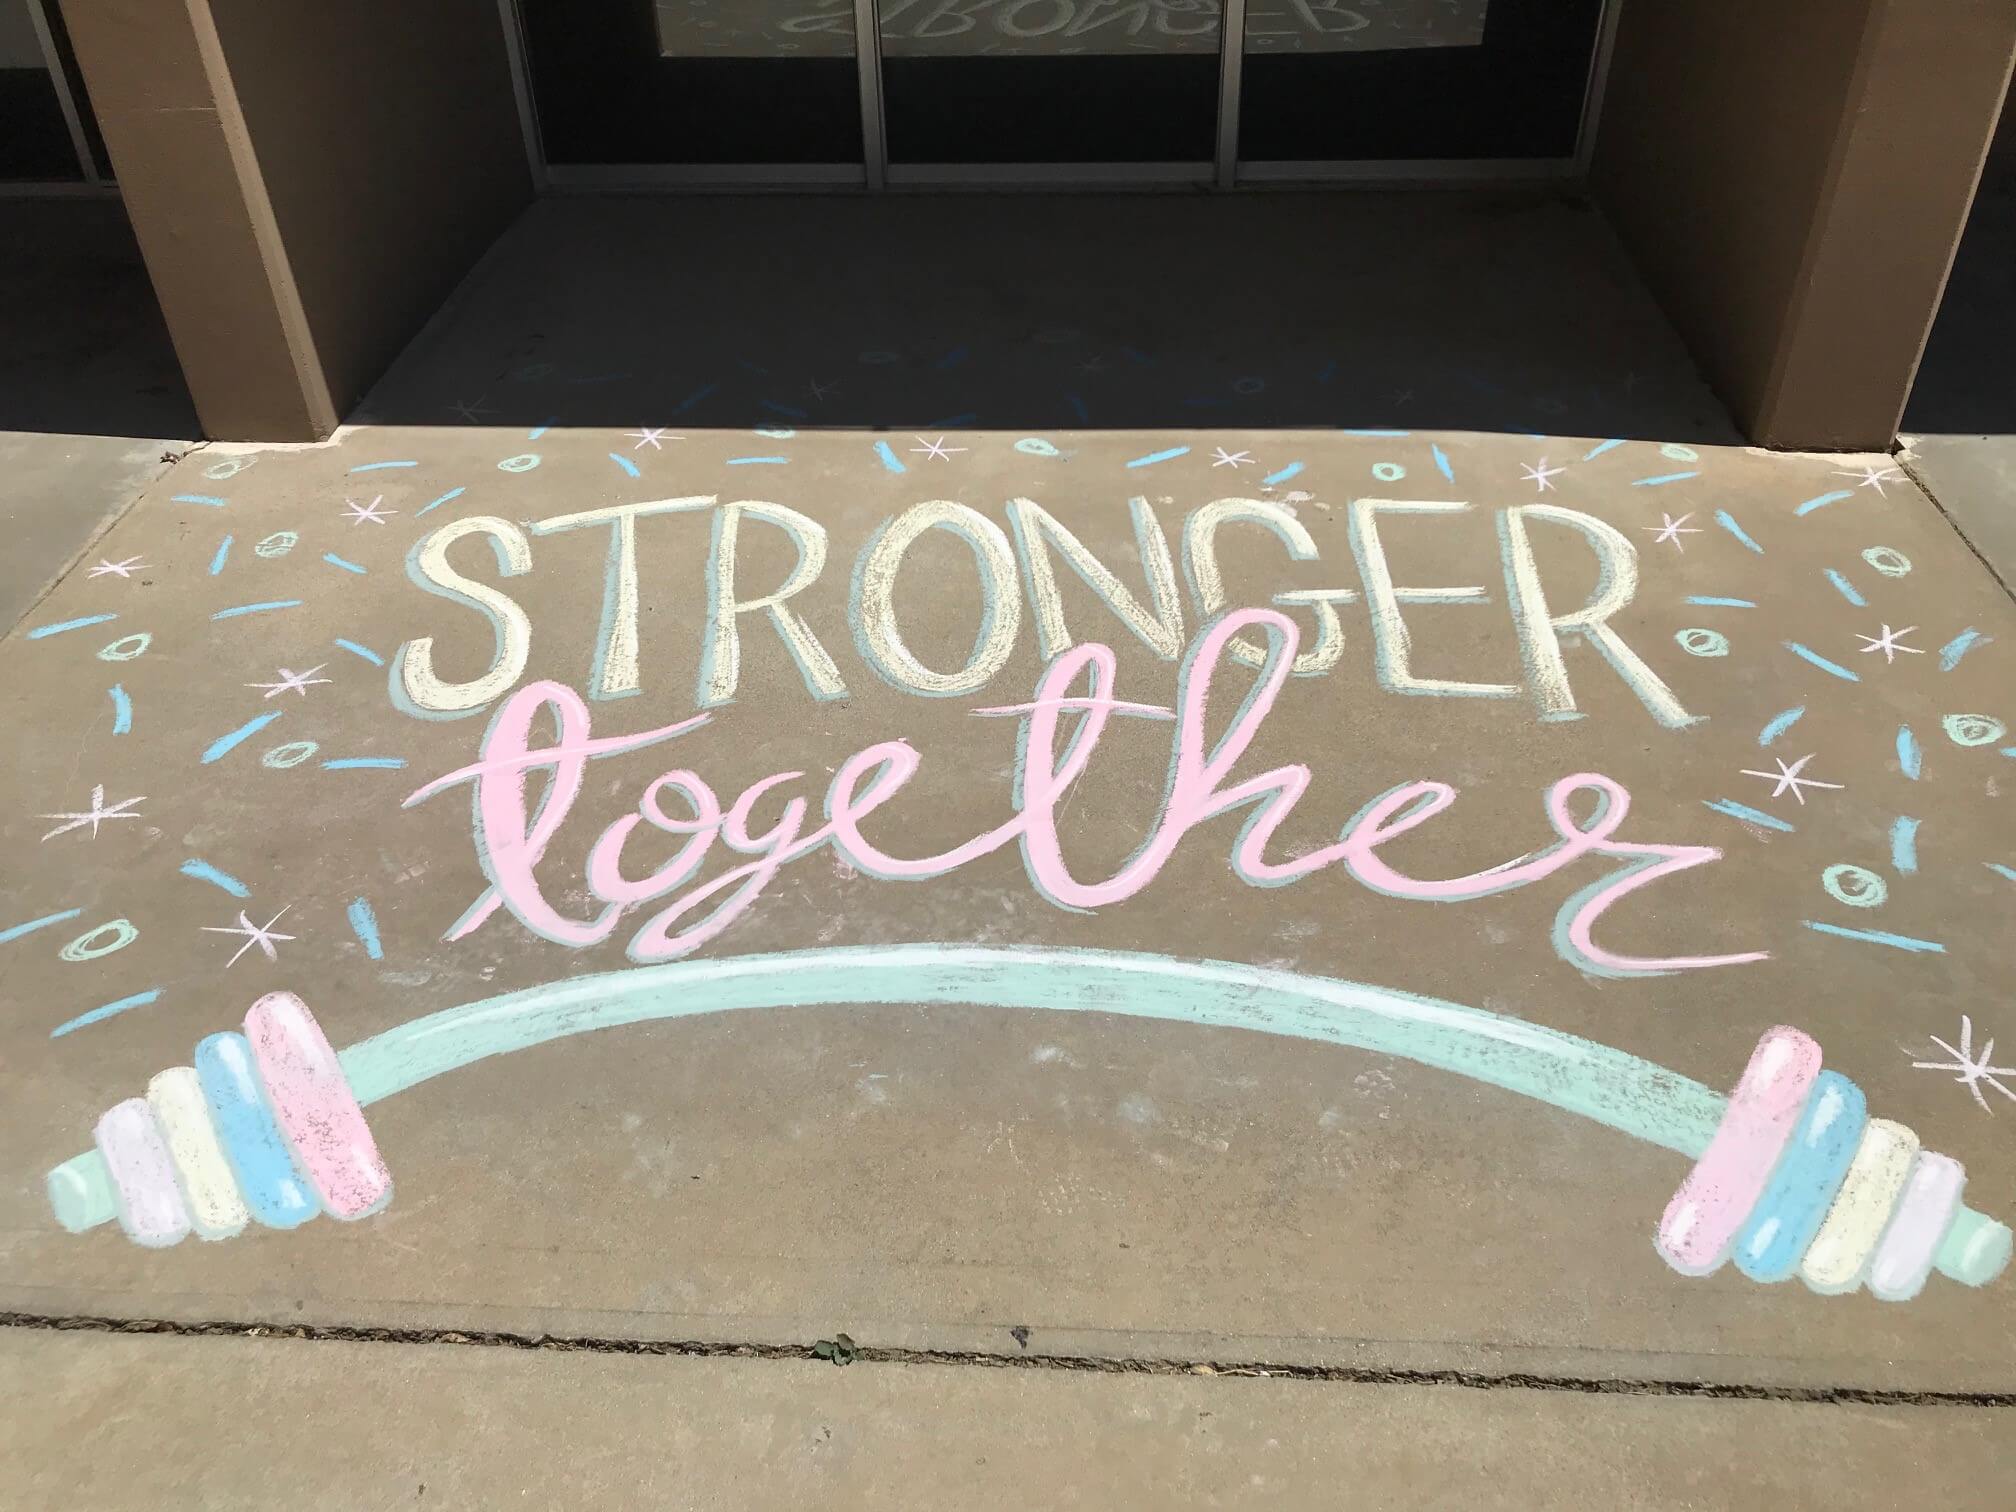 Chalk drawing that says "stronger together"